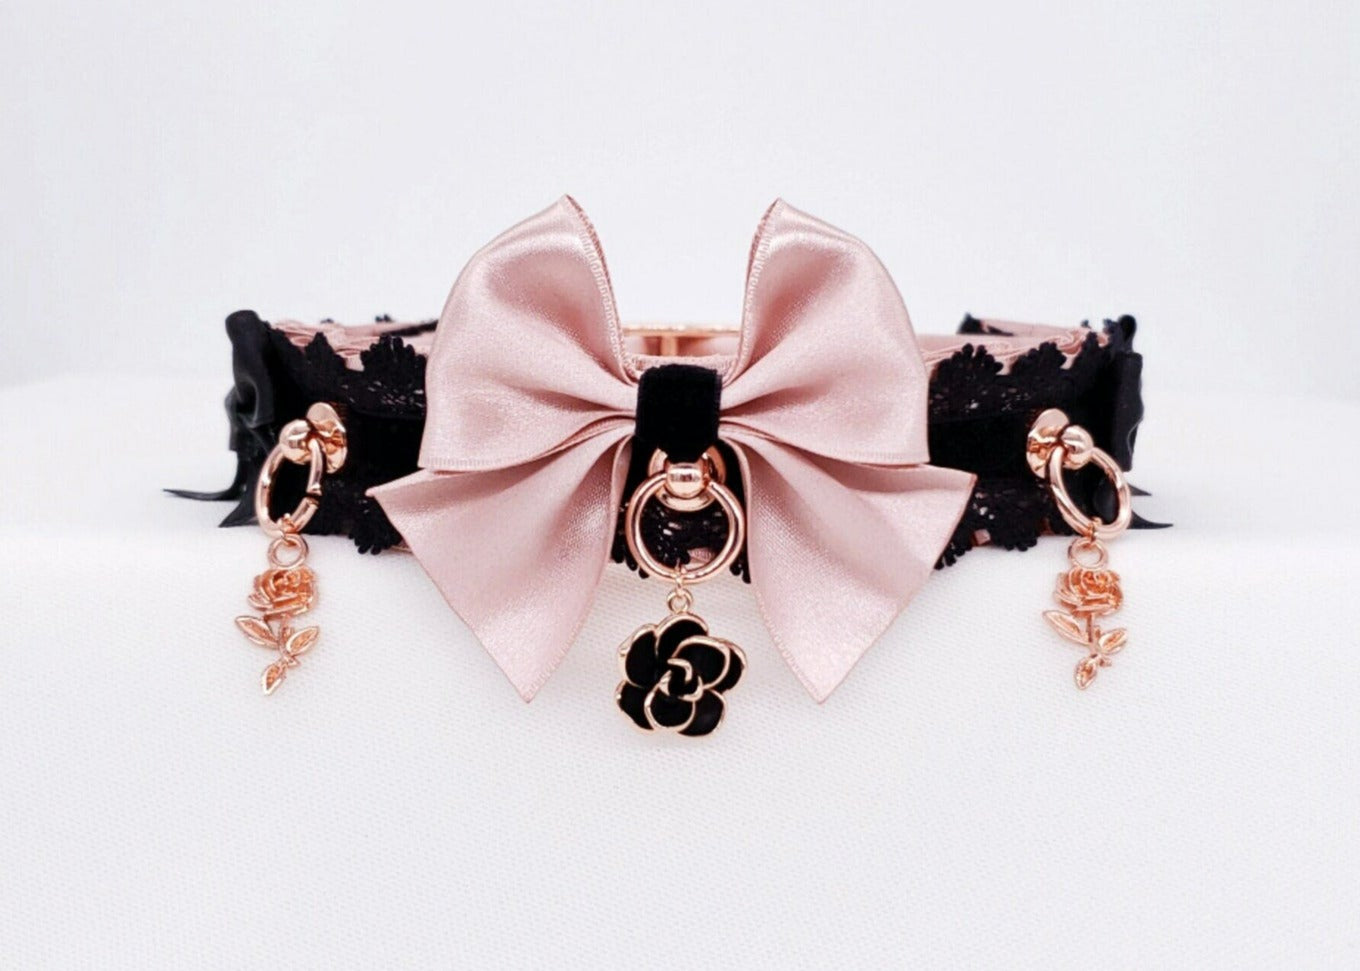 Rose Garden - Rose Gold and Black Lace Collar